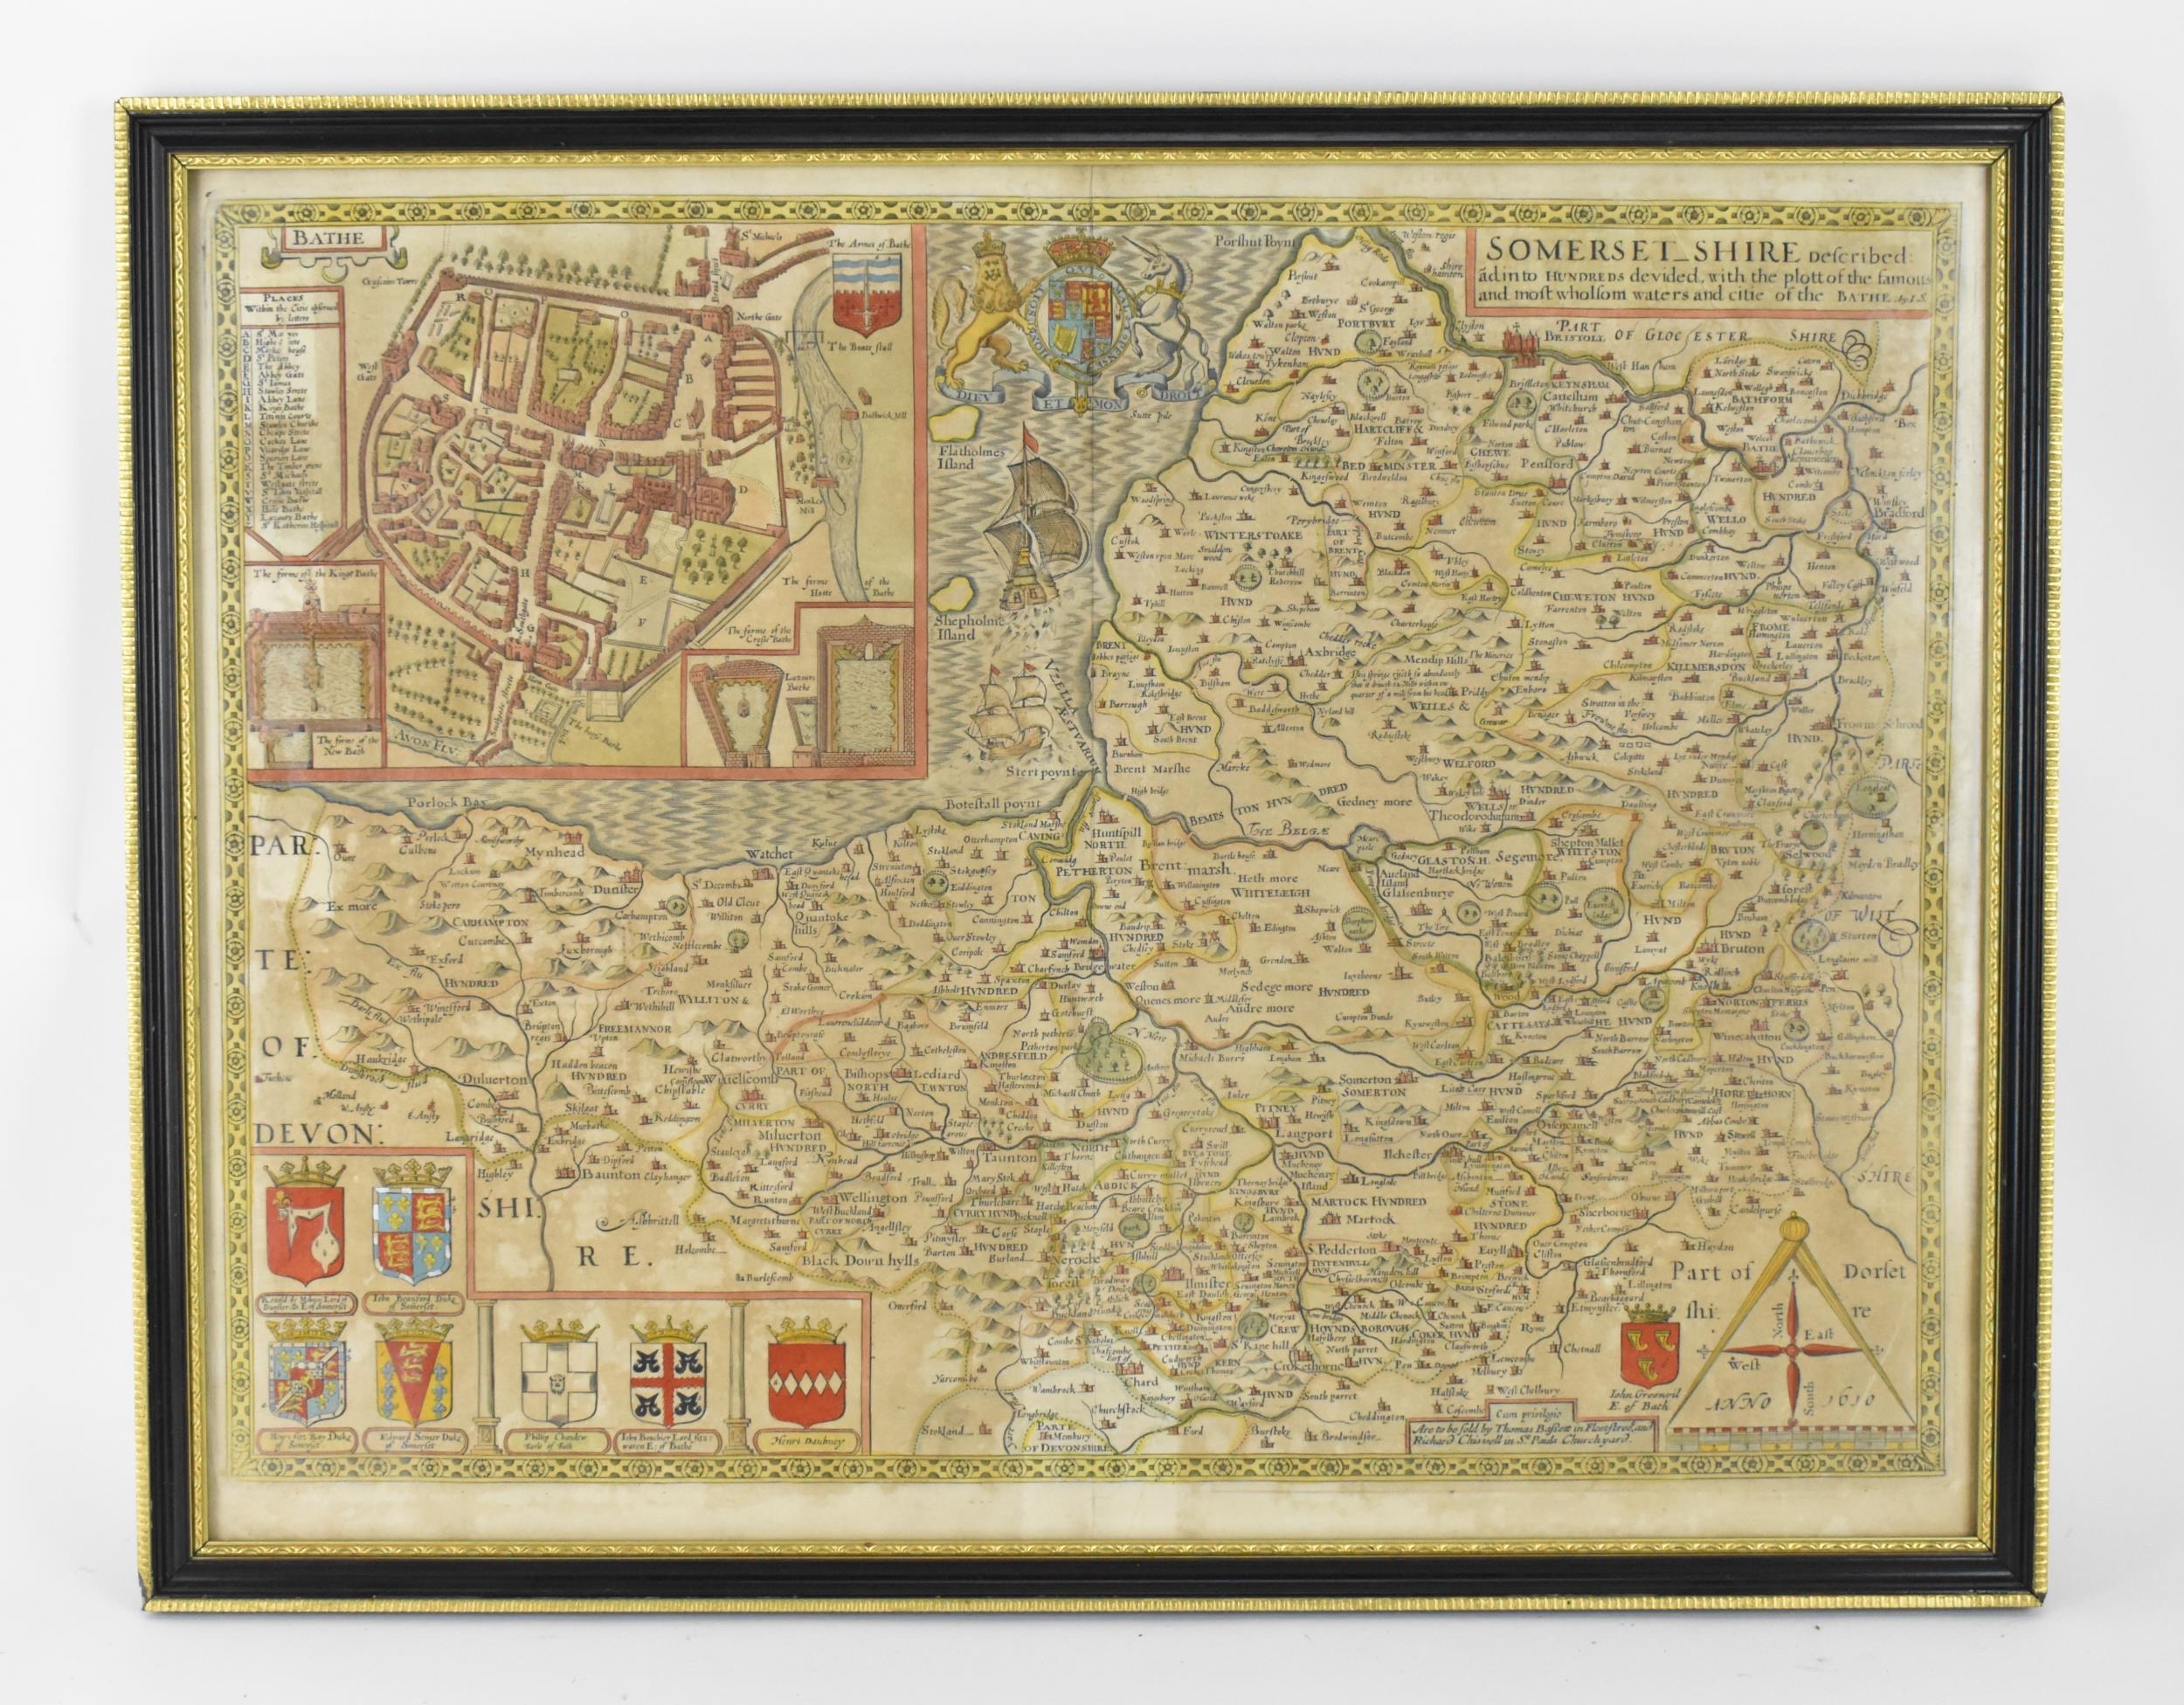 John Speed, Somersetshire, hand coloured engraved map for Sudbury and Humble, dated 1610, 38 x 51